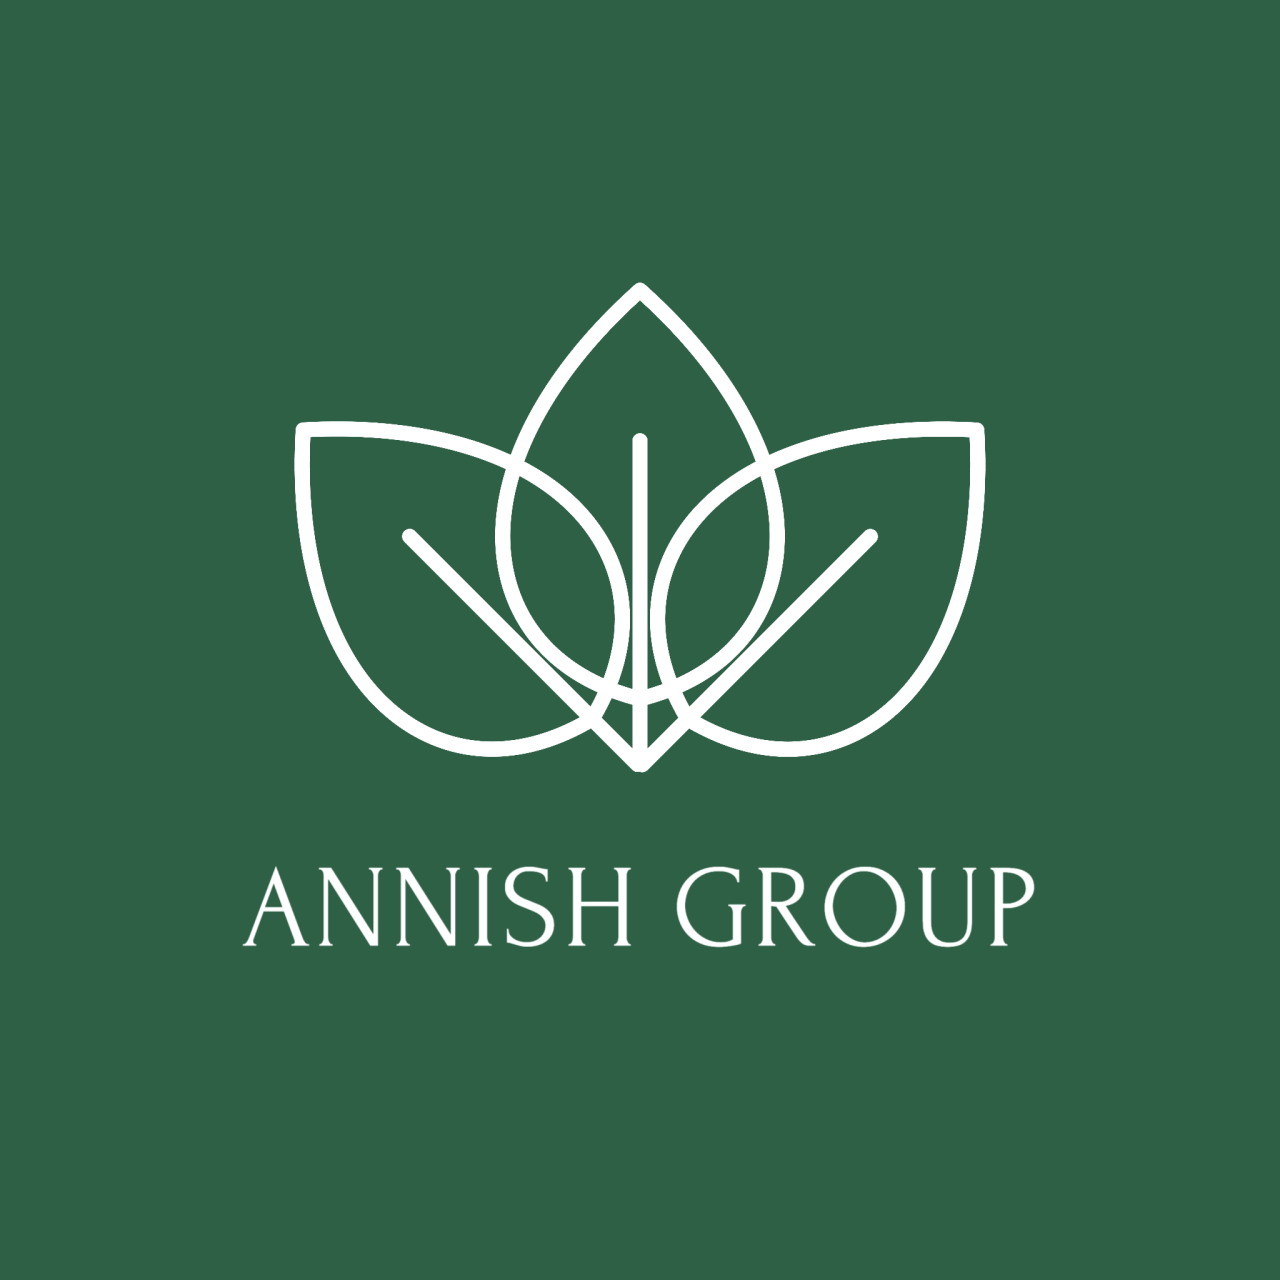 ANNISH GROUP's web page